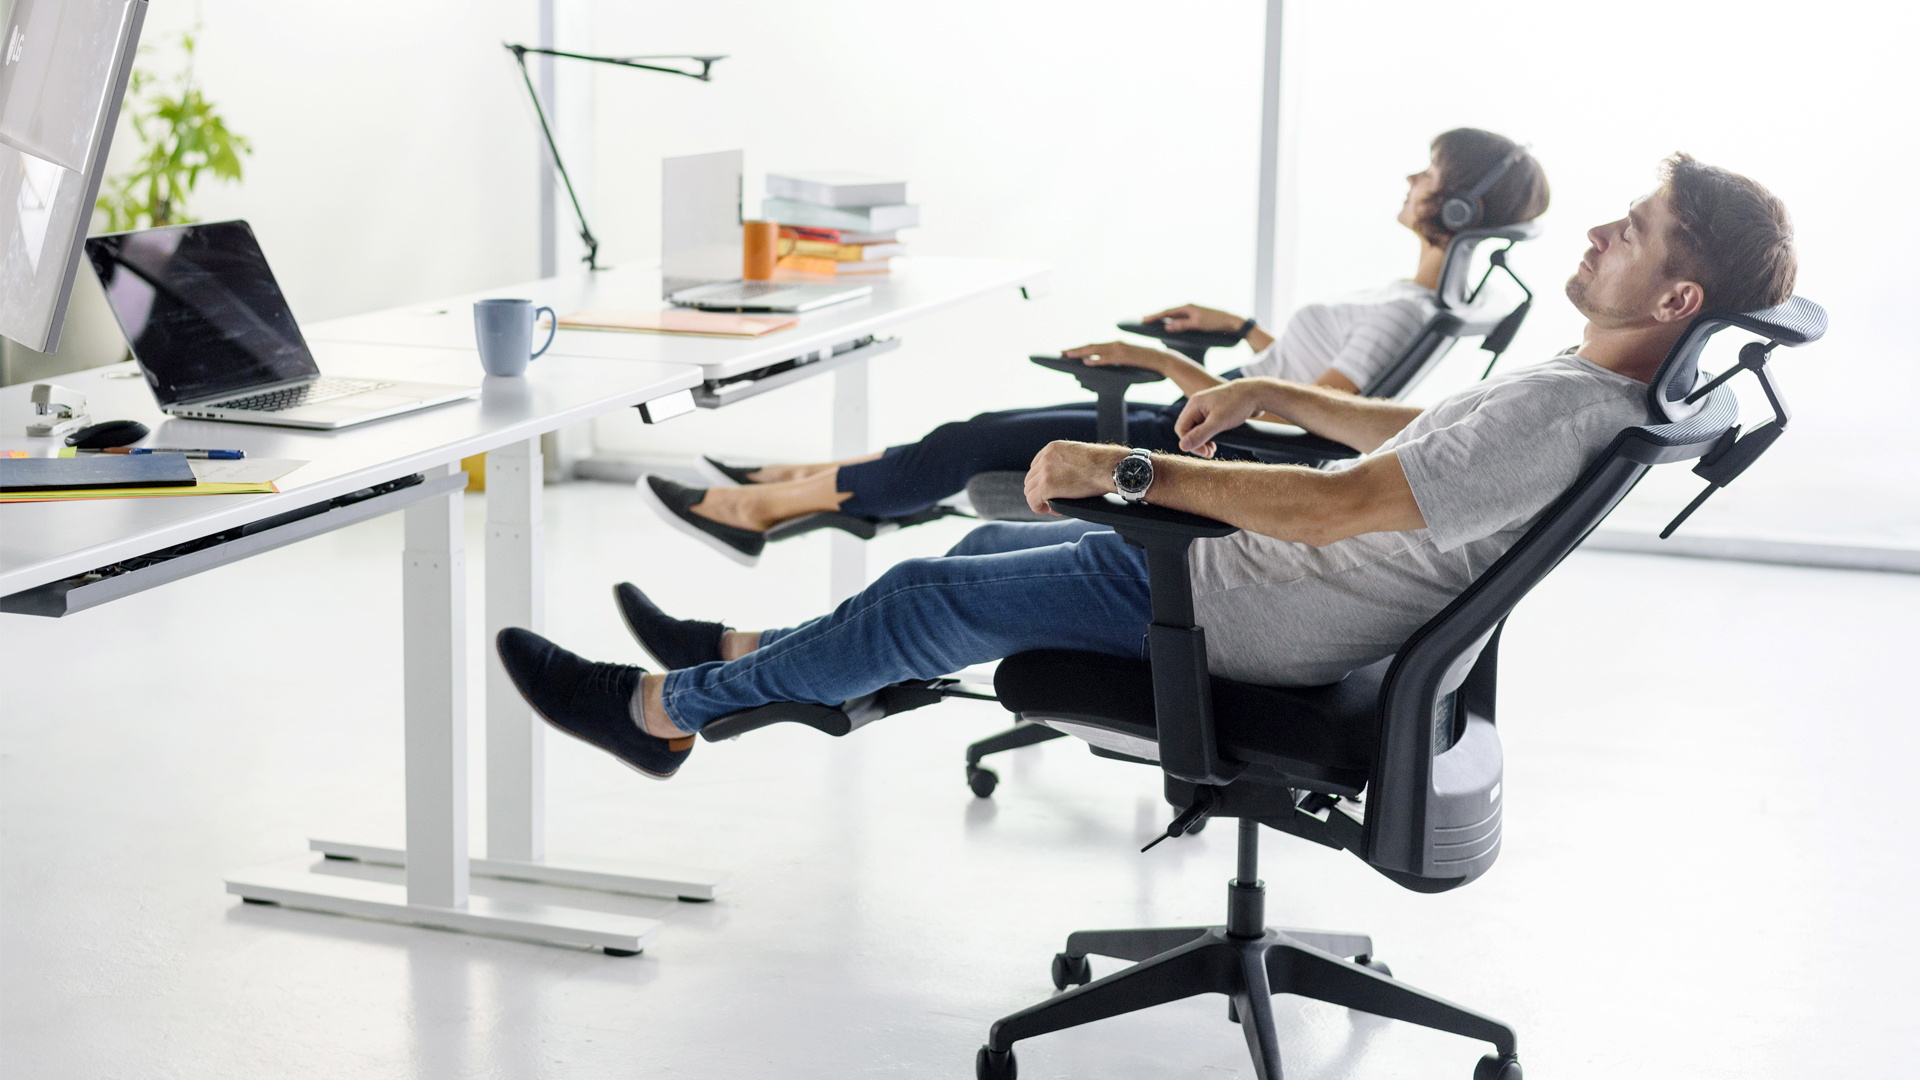 20 Most Comfortable Office Chair Options in 2022